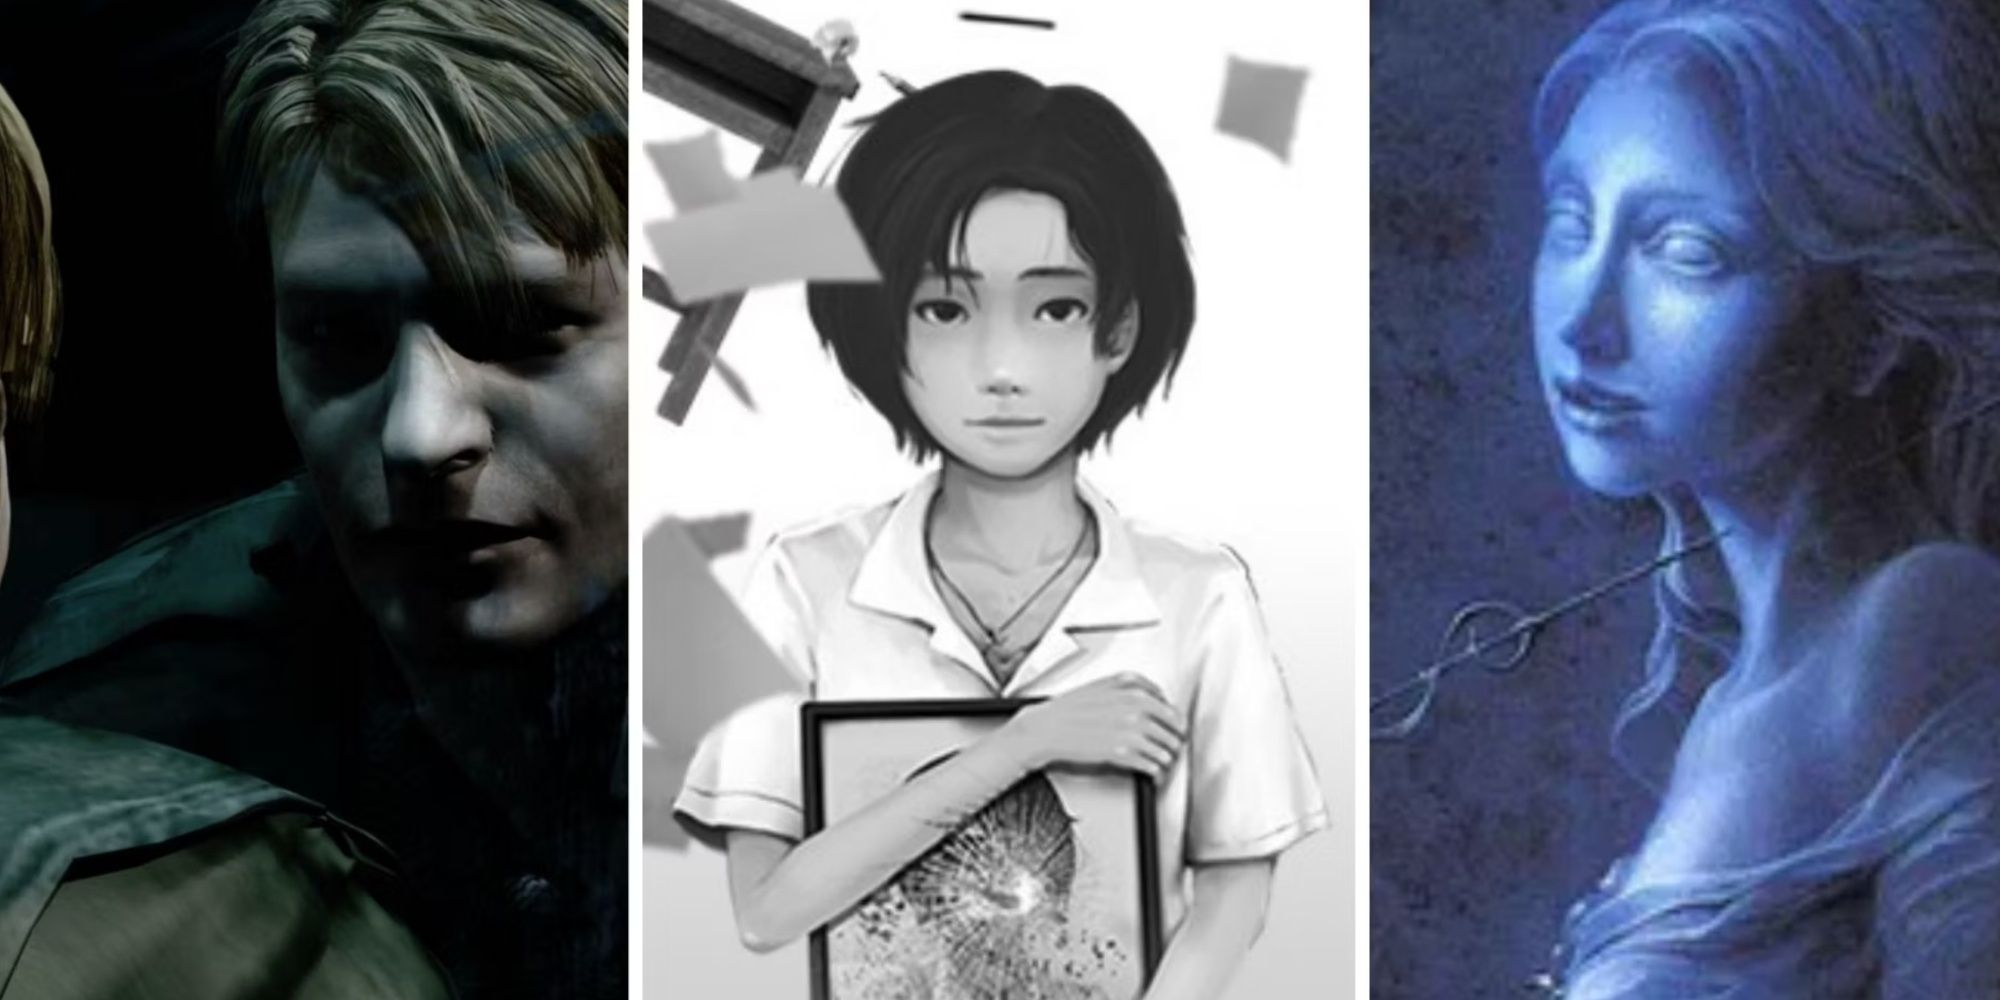 Split images of Silent Hill 2, Detention, and Clock Tower